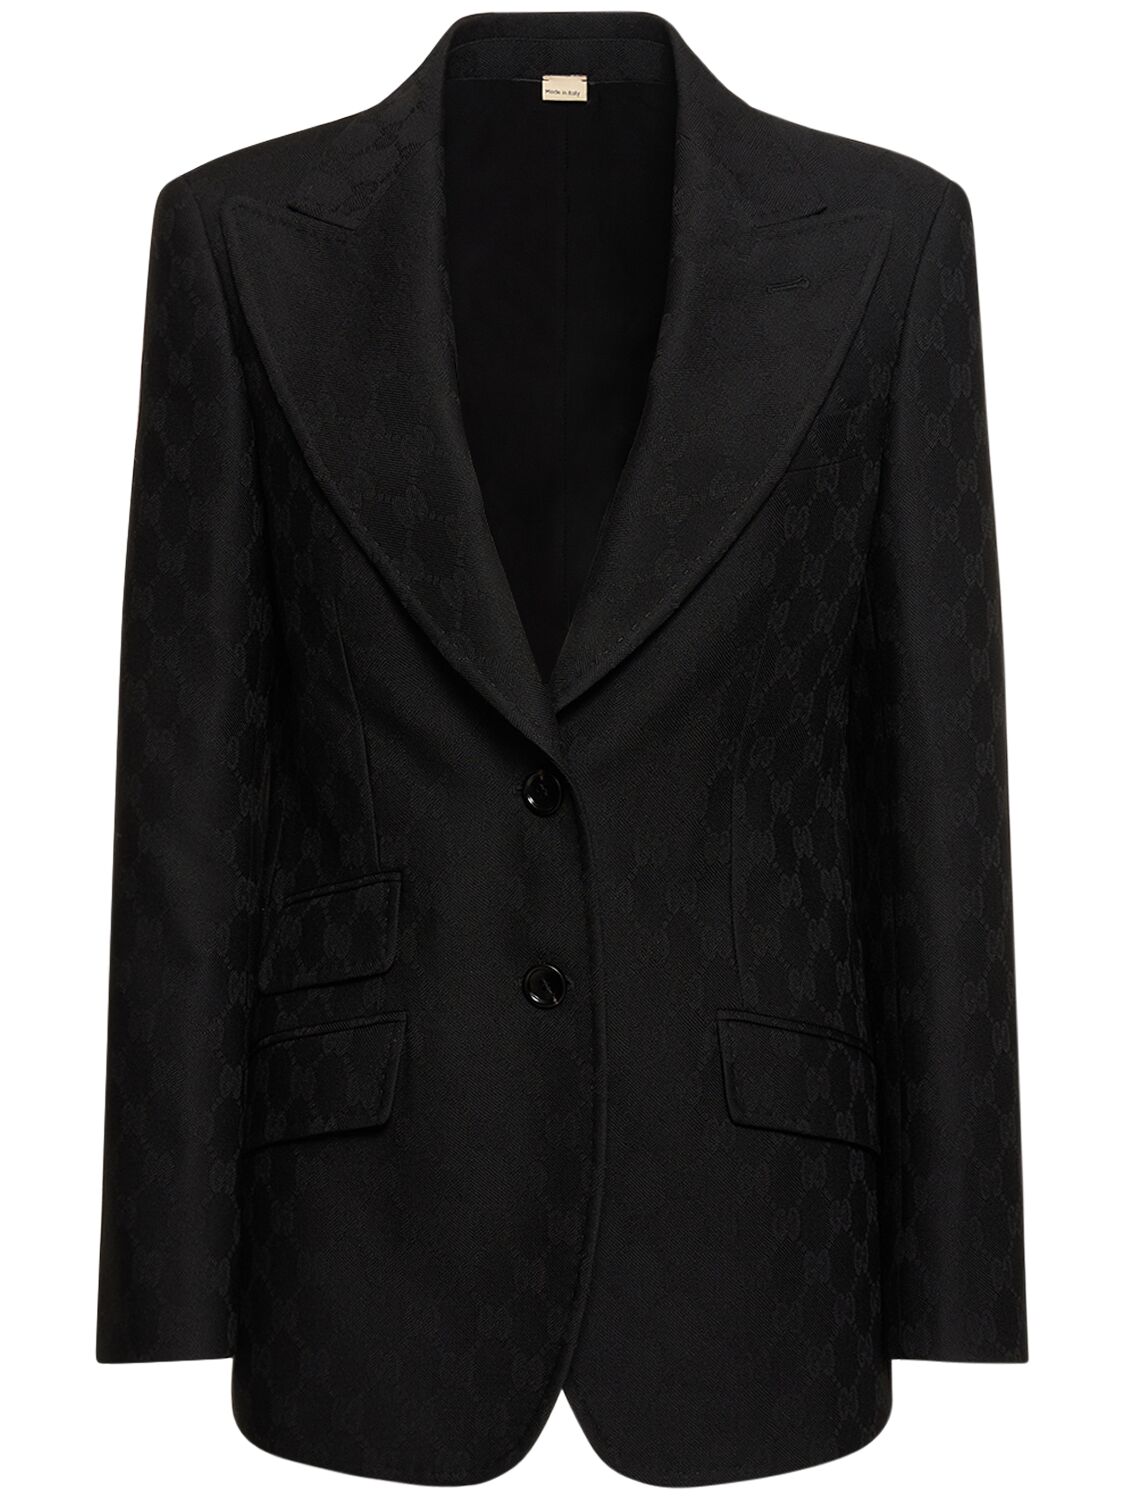 Gucci Gg Jacquard Dry Wool Jacket In Black